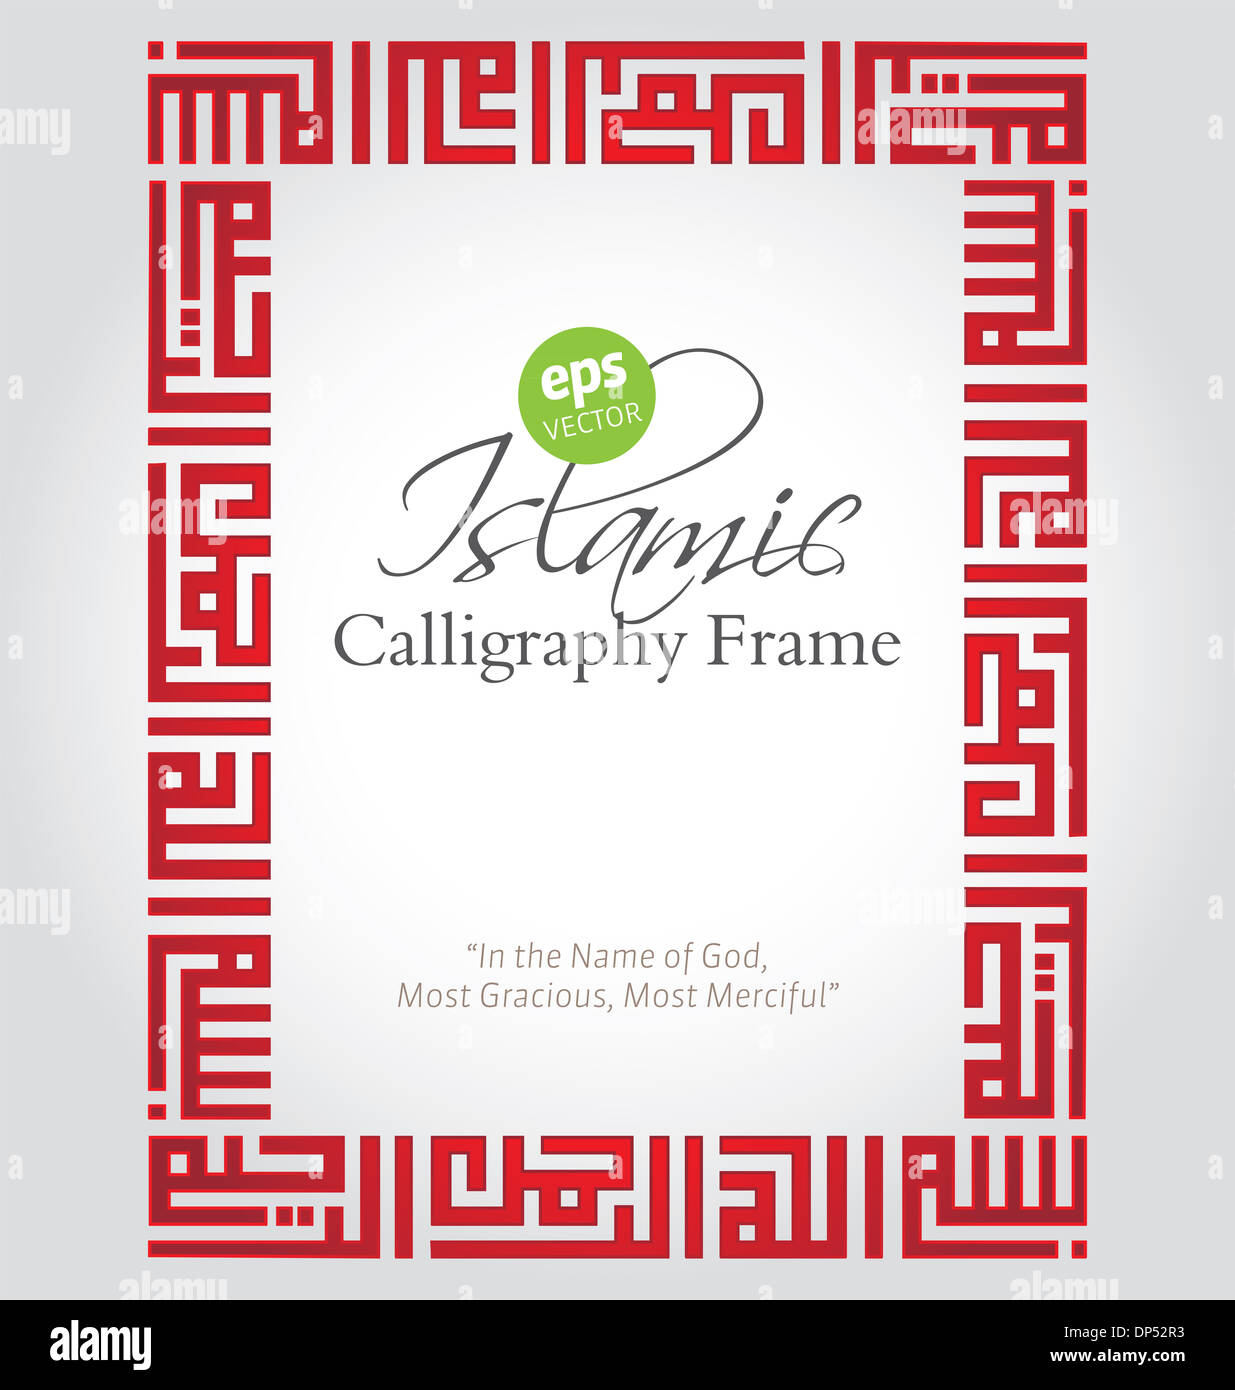 Vector Islamic Calligraphy Frame with the Phrase - In the Name of God, Most Graceful, Most Merciful Stock Photo